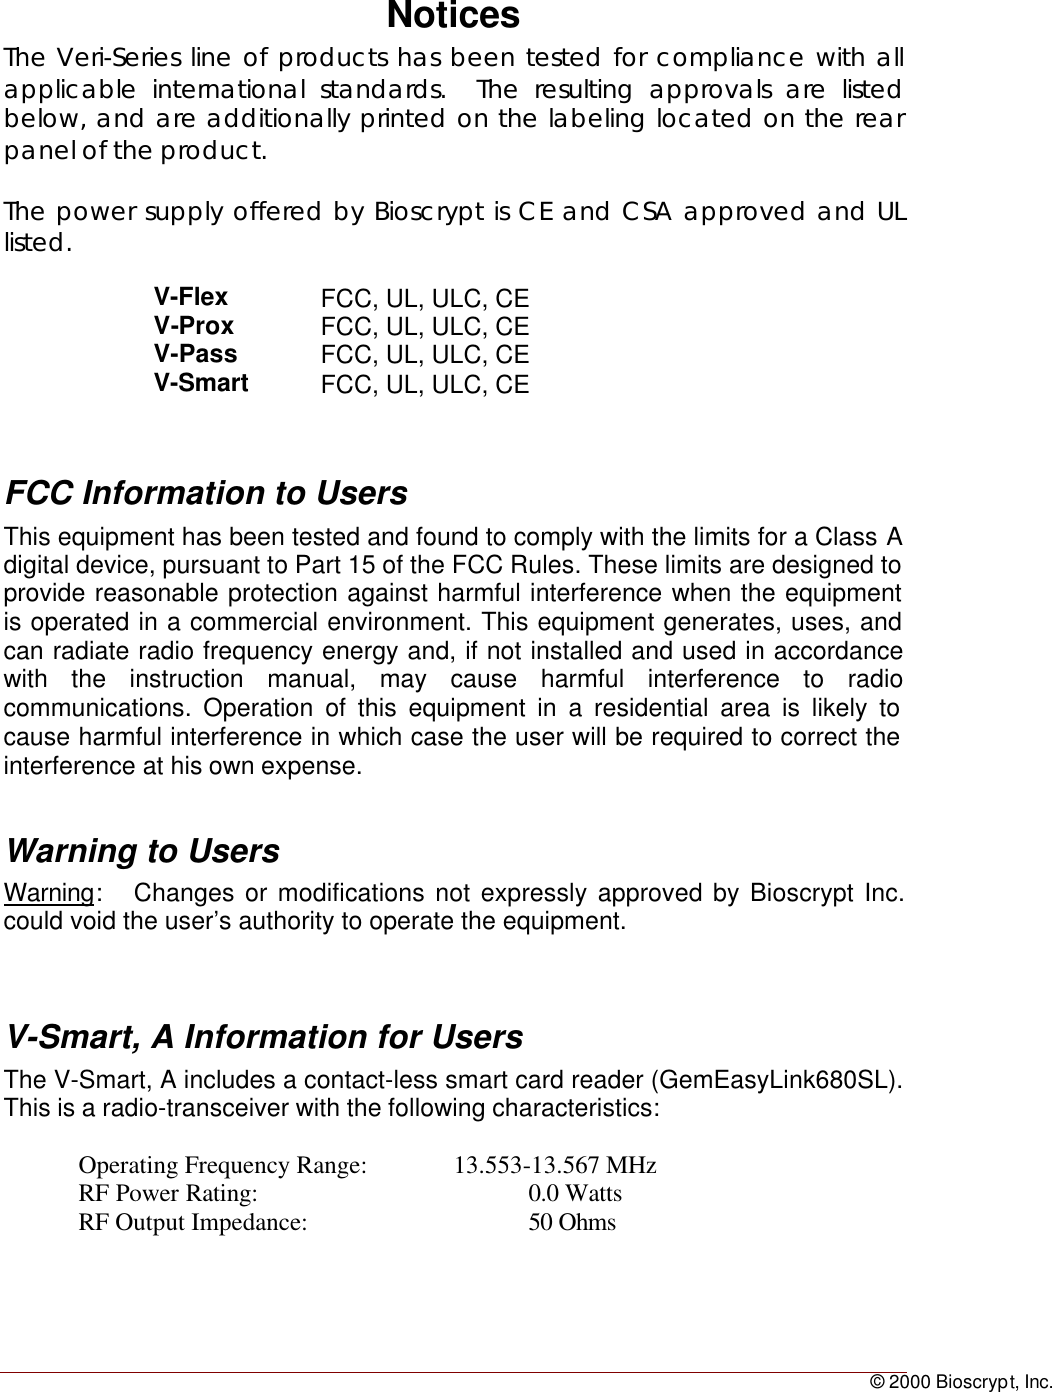 © 2000 Bioscrypt, Inc.NoticesThe Veri-Series line of products has been tested for compliance with allapplicable international standards.  The resulting approvals are listedbelow, and are additionally printed on the labeling located on the rearpanel of the product.The power supply offered by Bioscrypt is CE and CSA approved and ULlisted.V-Flex FCC, UL, ULC, CEV-Prox FCC, UL, ULC, CEV-Pass FCC, UL, ULC, CEV-Smart FCC, UL, ULC, CEFCC Information to UsersThis equipment has been tested and found to comply with the limits for a Class Adigital device, pursuant to Part 15 of the FCC Rules. These limits are designed toprovide reasonable protection against harmful interference when the equipmentis operated in a commercial environment. This equipment generates, uses, andcan radiate radio frequency energy and, if not installed and used in accordancewith the instruction manual, may cause harmful interference to radiocommunications. Operation of this equipment in a residential area is likely tocause harmful interference in which case the user will be required to correct theinterference at his own expense.Warning to UsersWarning:   Changes or modifications not expressly approved by Bioscrypt Inc.could void the user’s authority to operate the equipment.V-Smart, A Information for UsersThe V-Smart, A includes a contact-less smart card reader (GemEasyLink680SL).This is a radio-transceiver with the following characteristics:Operating Frequency Range: 13.553-13.567 MHzRF Power Rating: 0.0 WattsRF Output Impedance: 50 Ohms